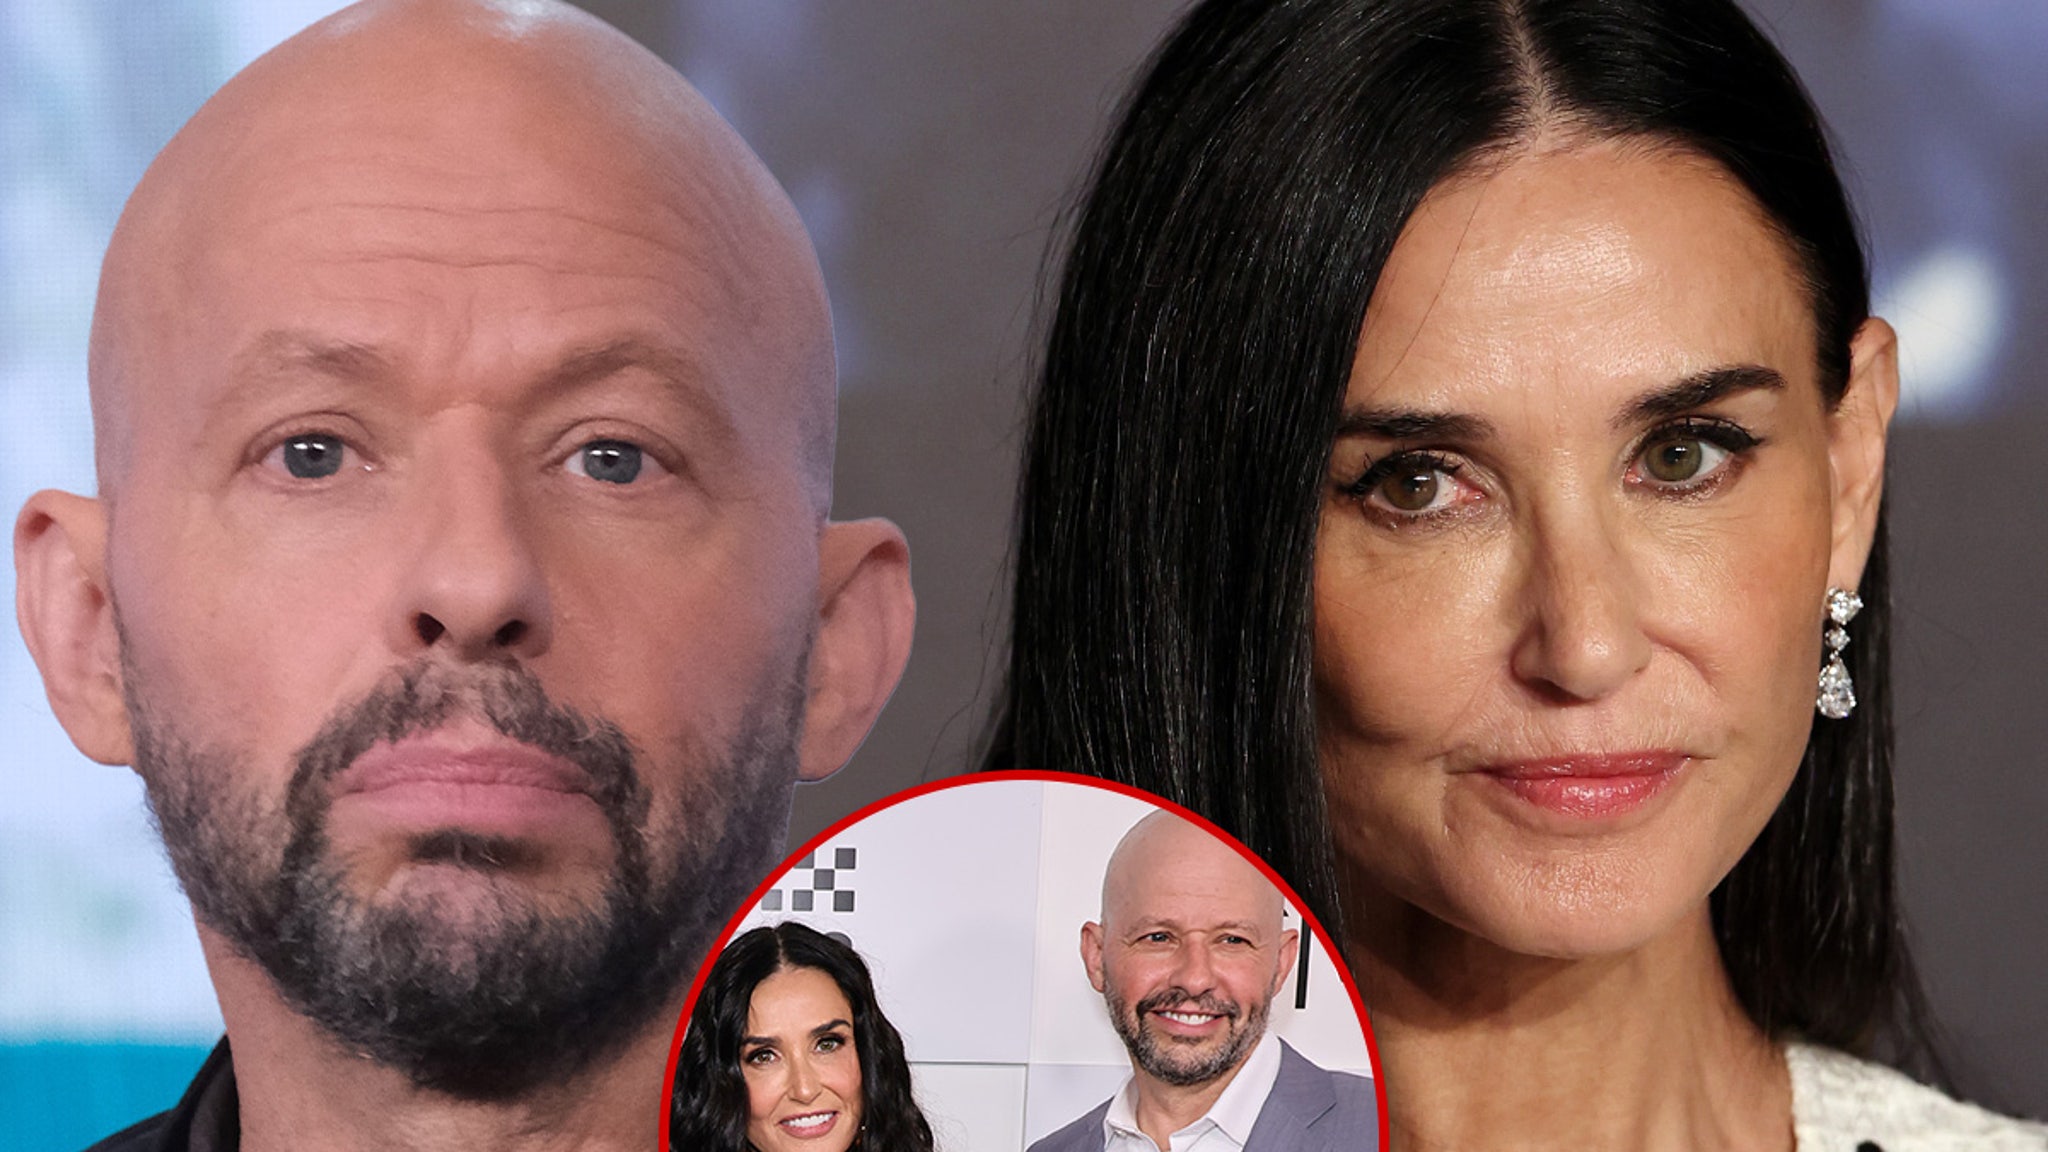 Jon Cryer didn't know about Demi Moore's drug addiction during their relationship